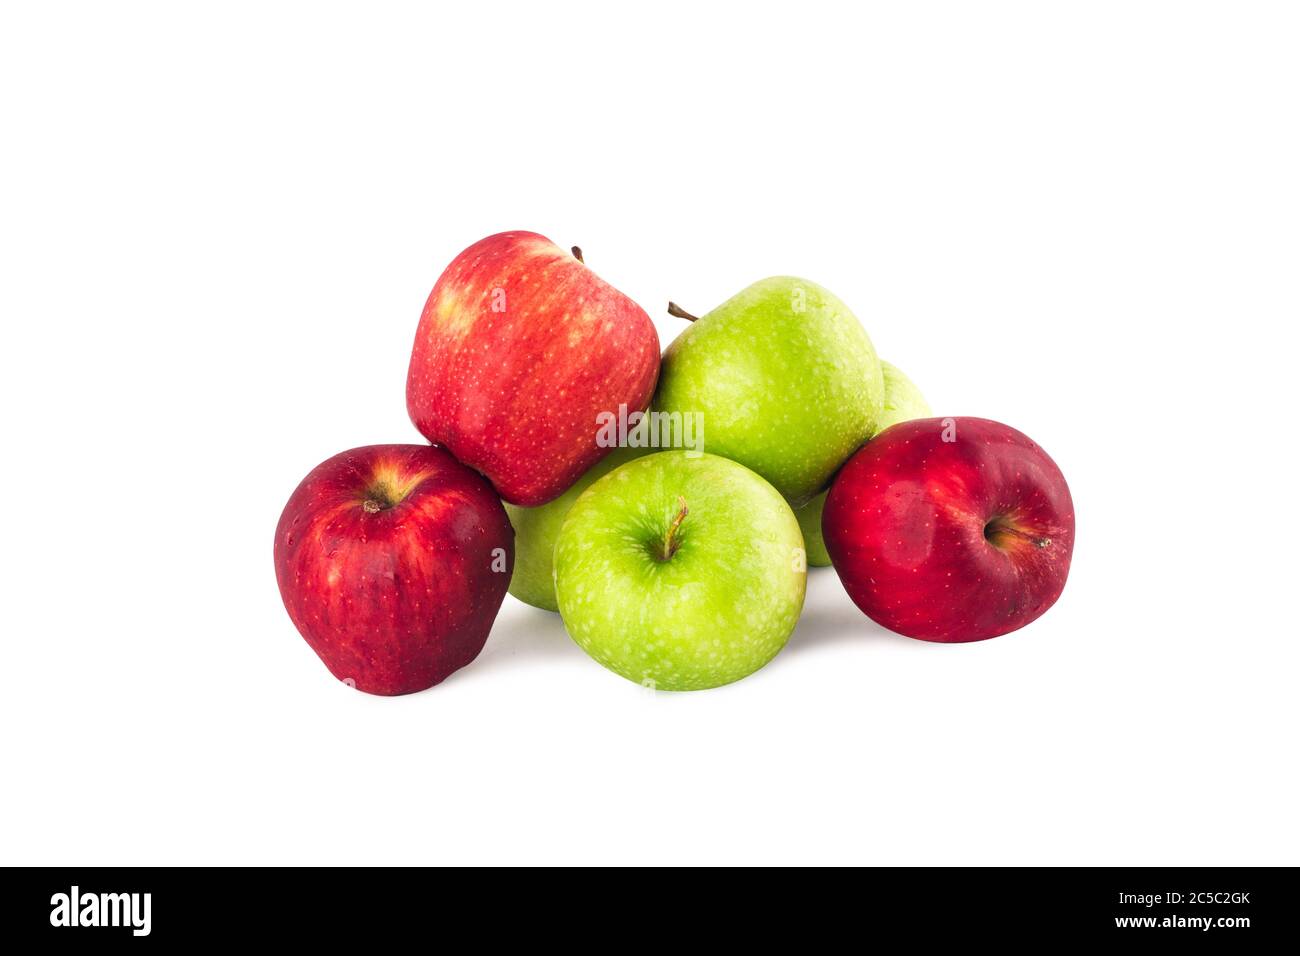 green apple and red apple ( malus domestica ) on white background fruit agriculture food isolated Stock Photo